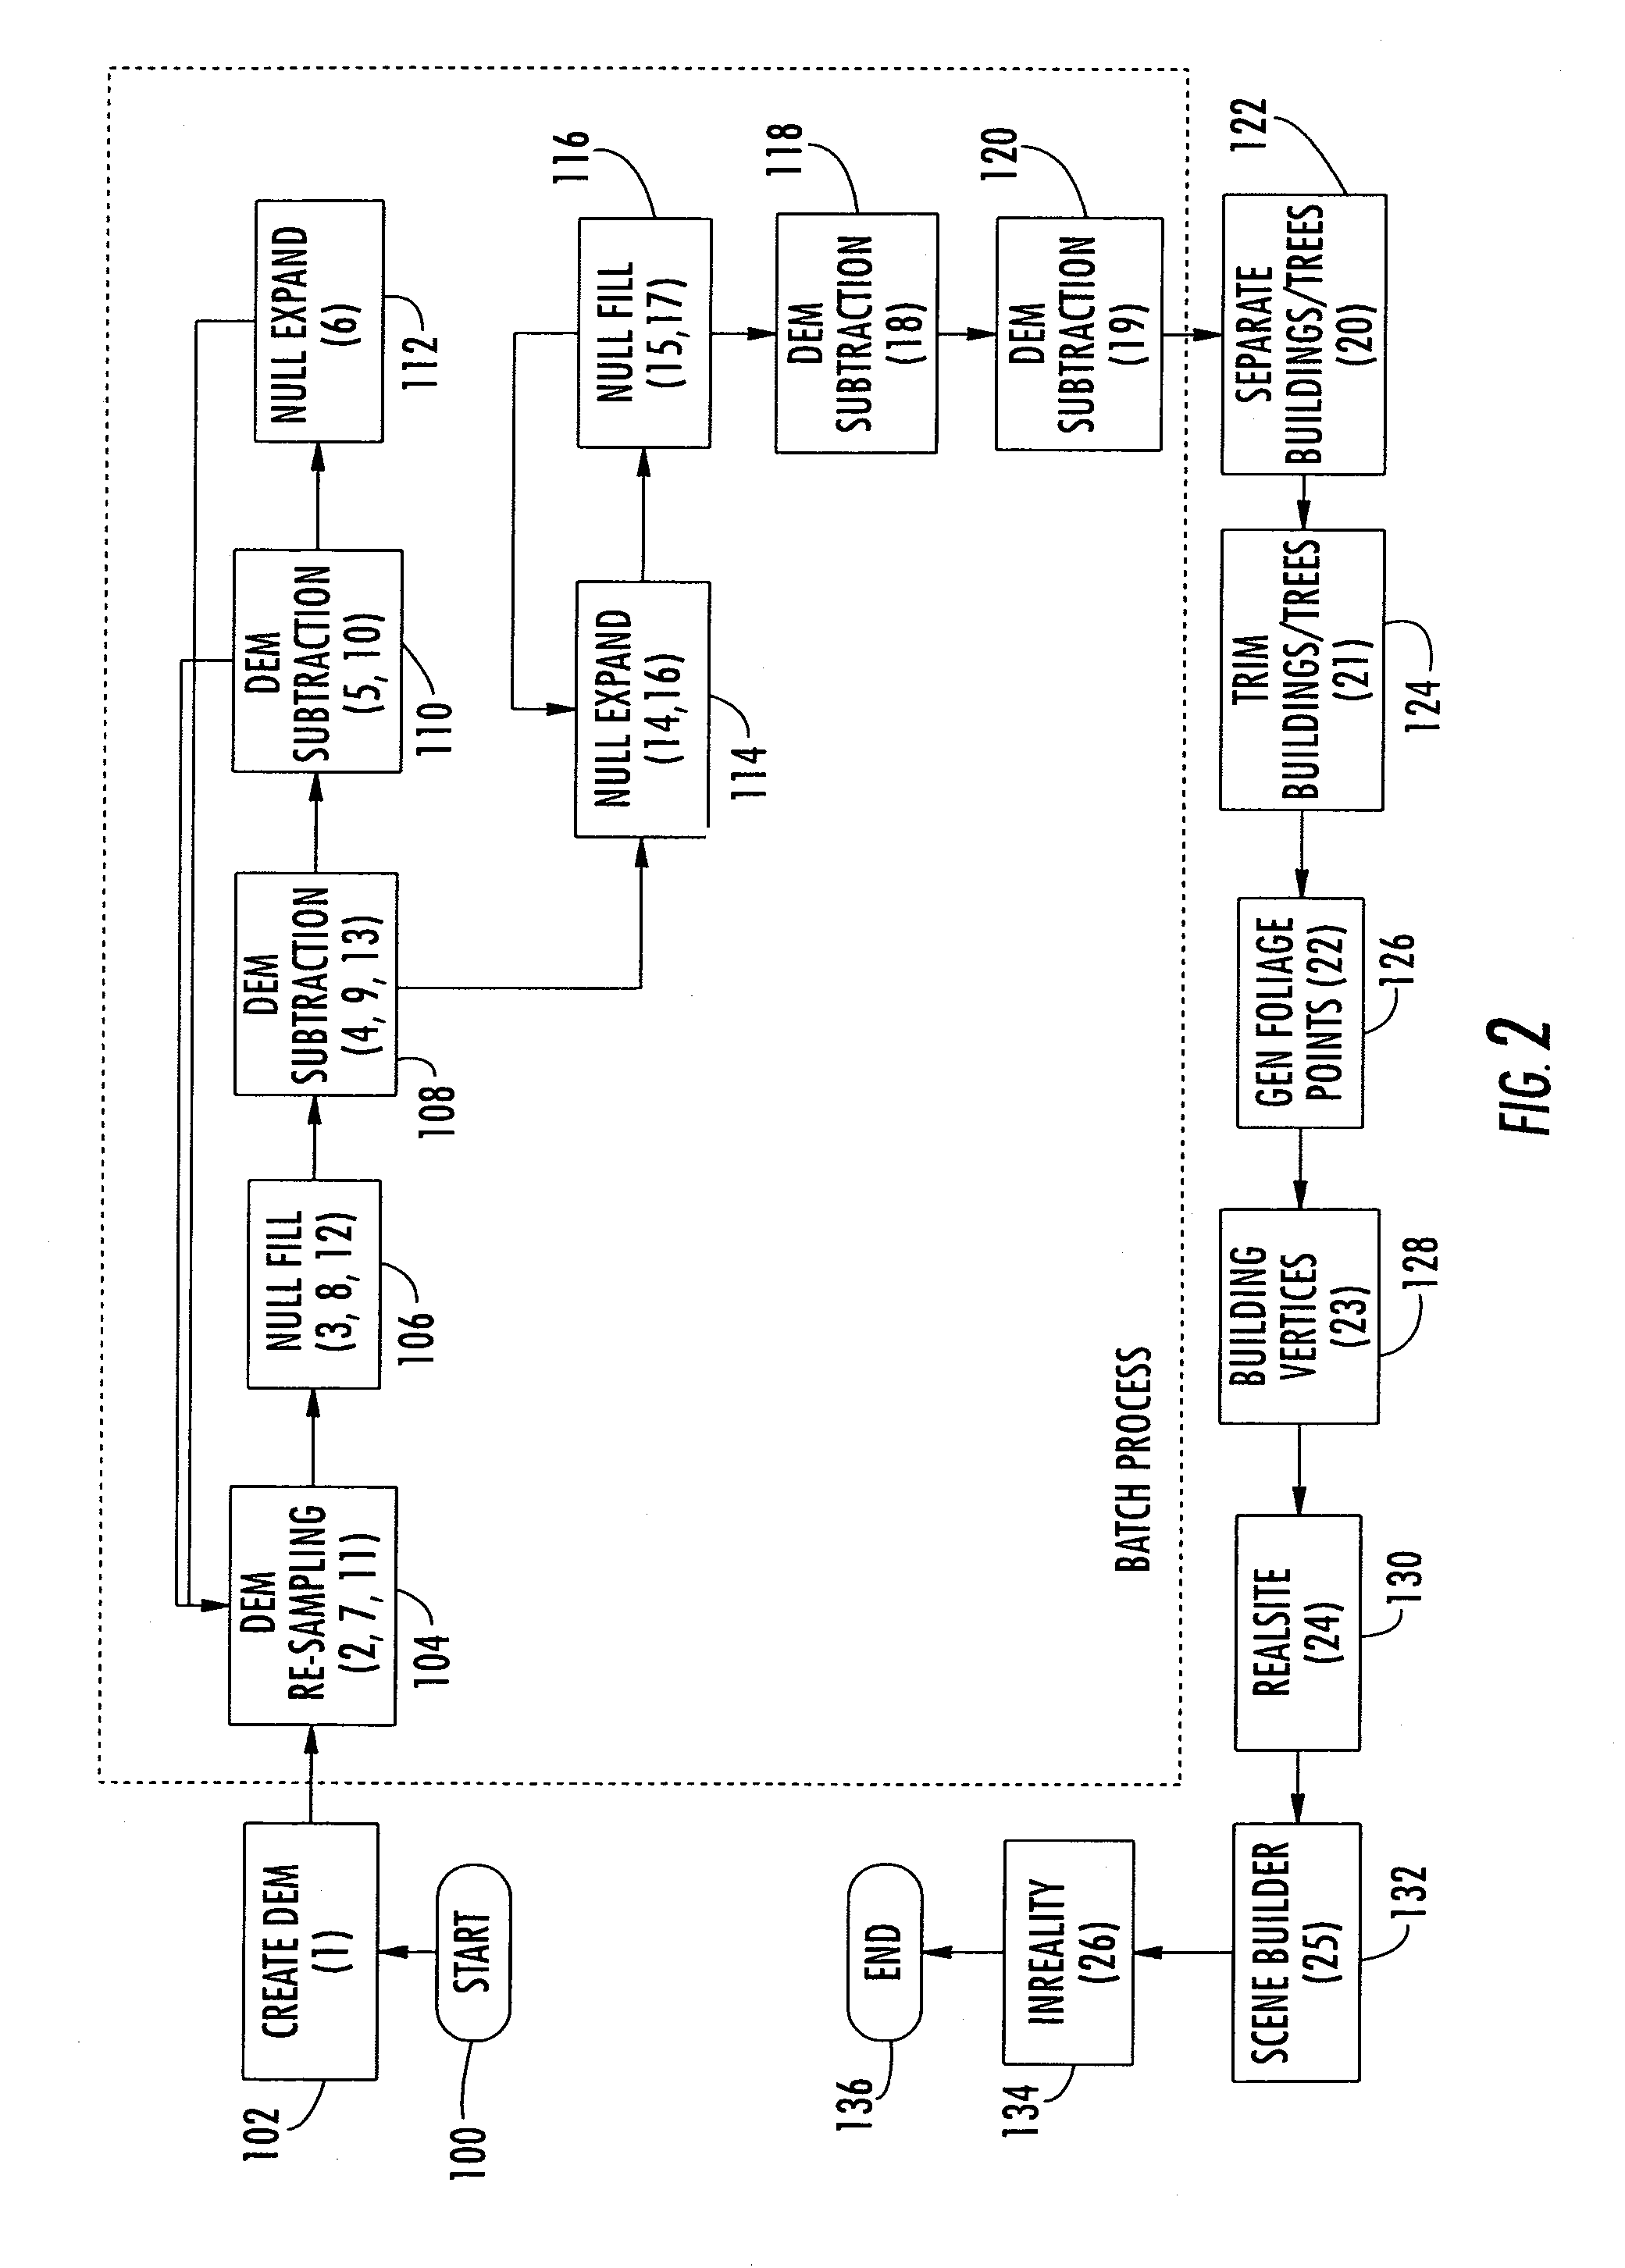 Method and apparatus for enhancing a digital elevation model (DEM) for topographical modeling